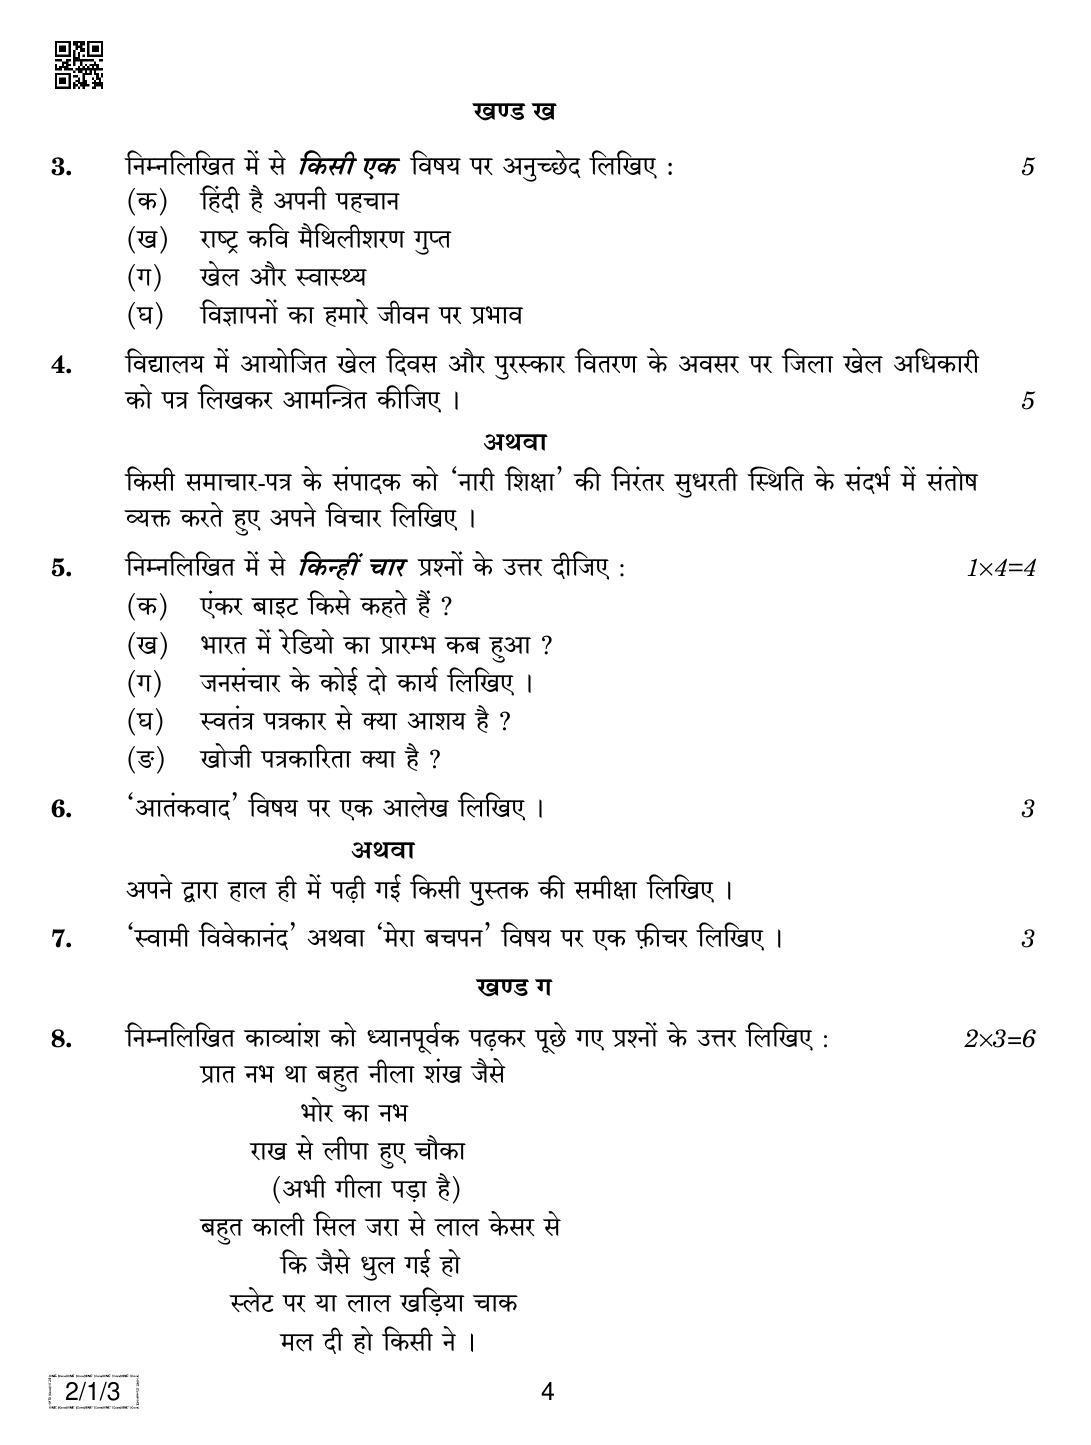 CBSE Class 12 2-1-3 HINDI CORE 2019 Compartment Question Paper - Page 4